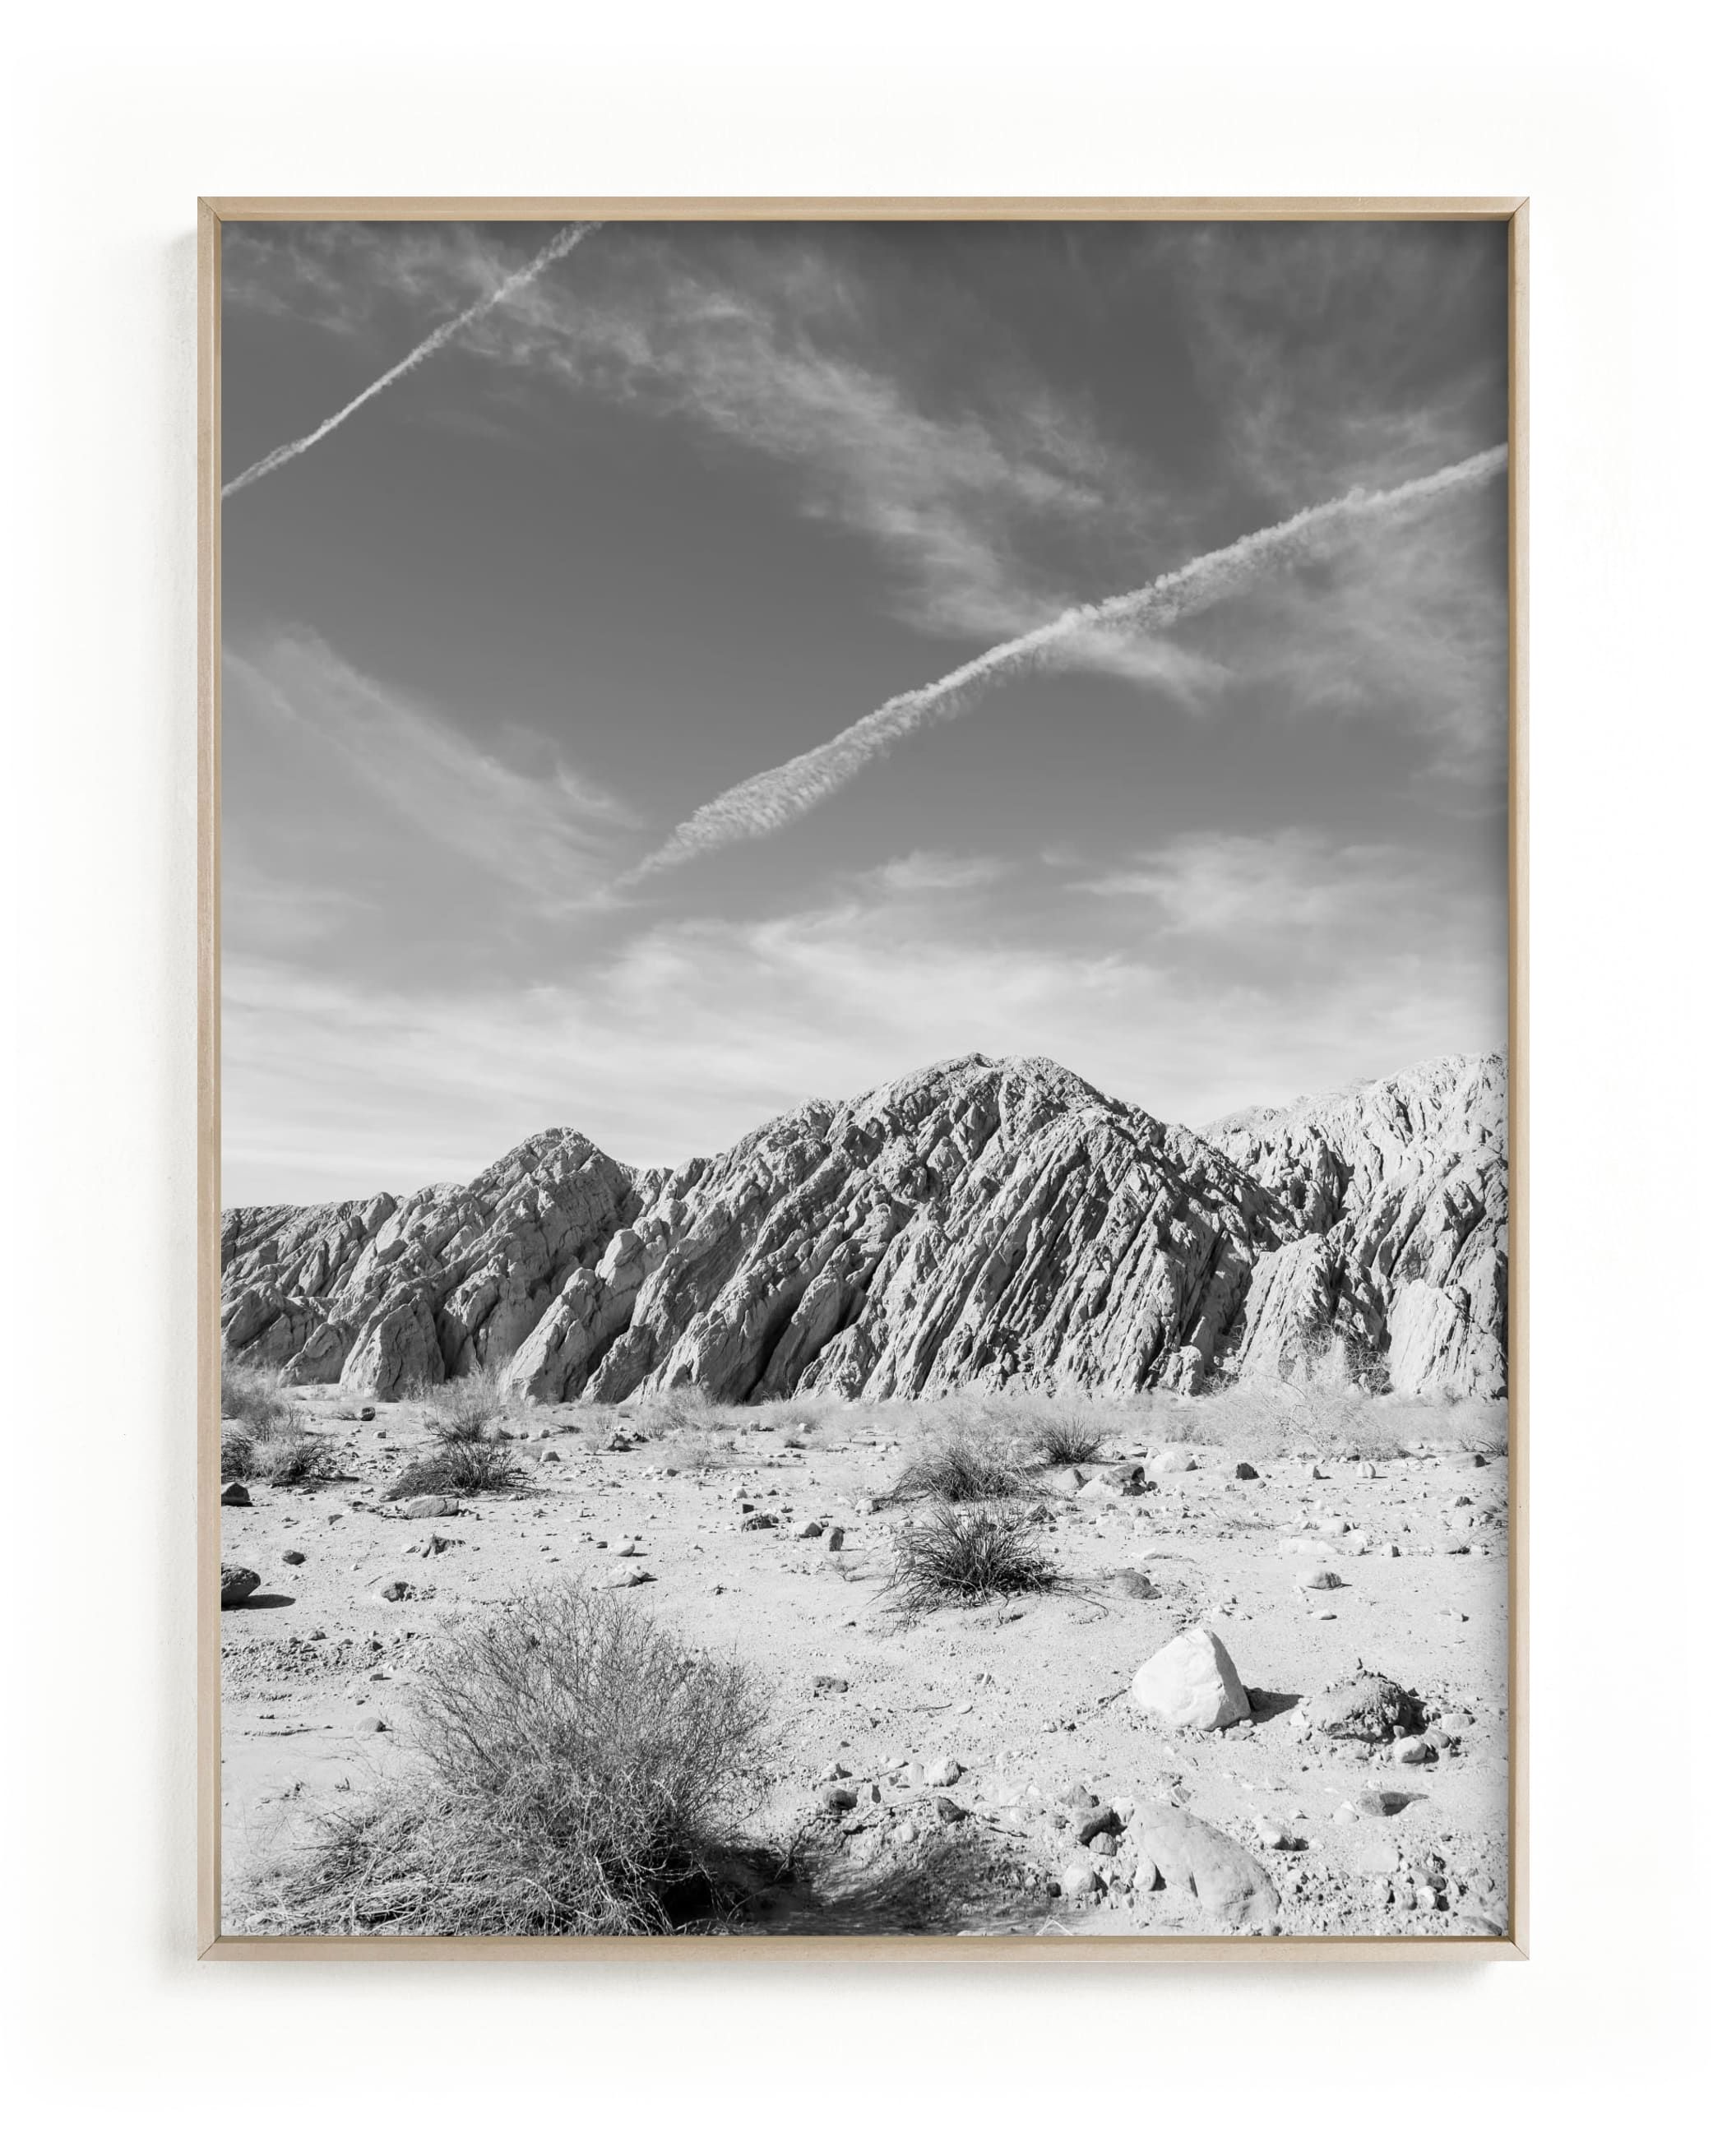 "Painted Canyon 4" - Grownup Open Edition Non-custom Art Print by Kamala Nahas. | Minted